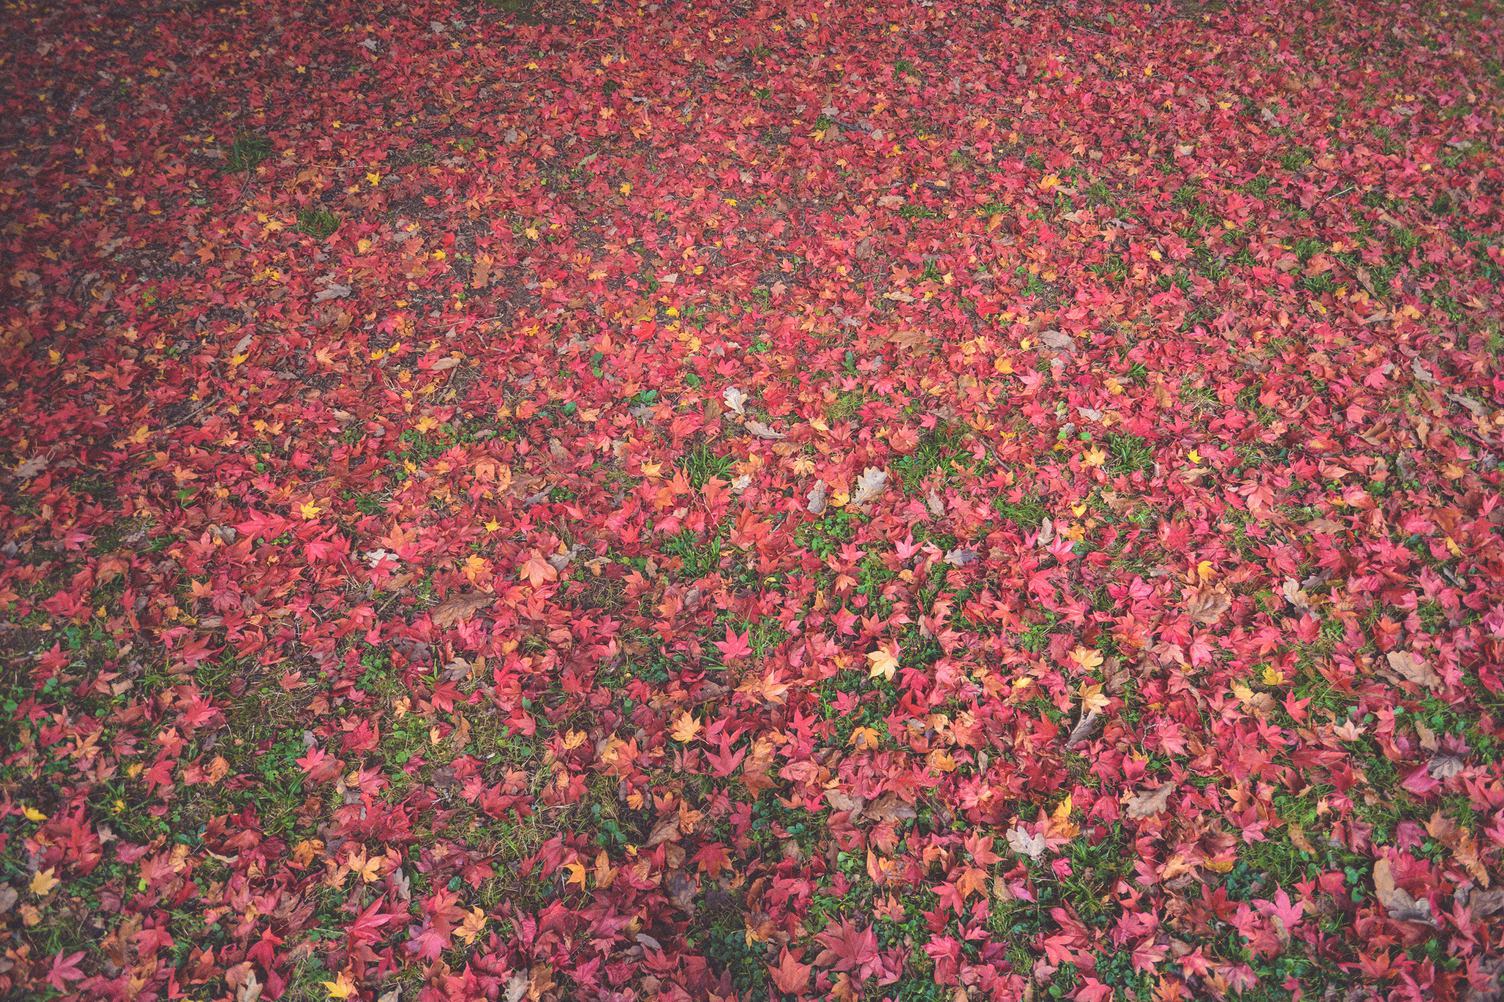 Autumn - Lawn Covered with Red Leaves